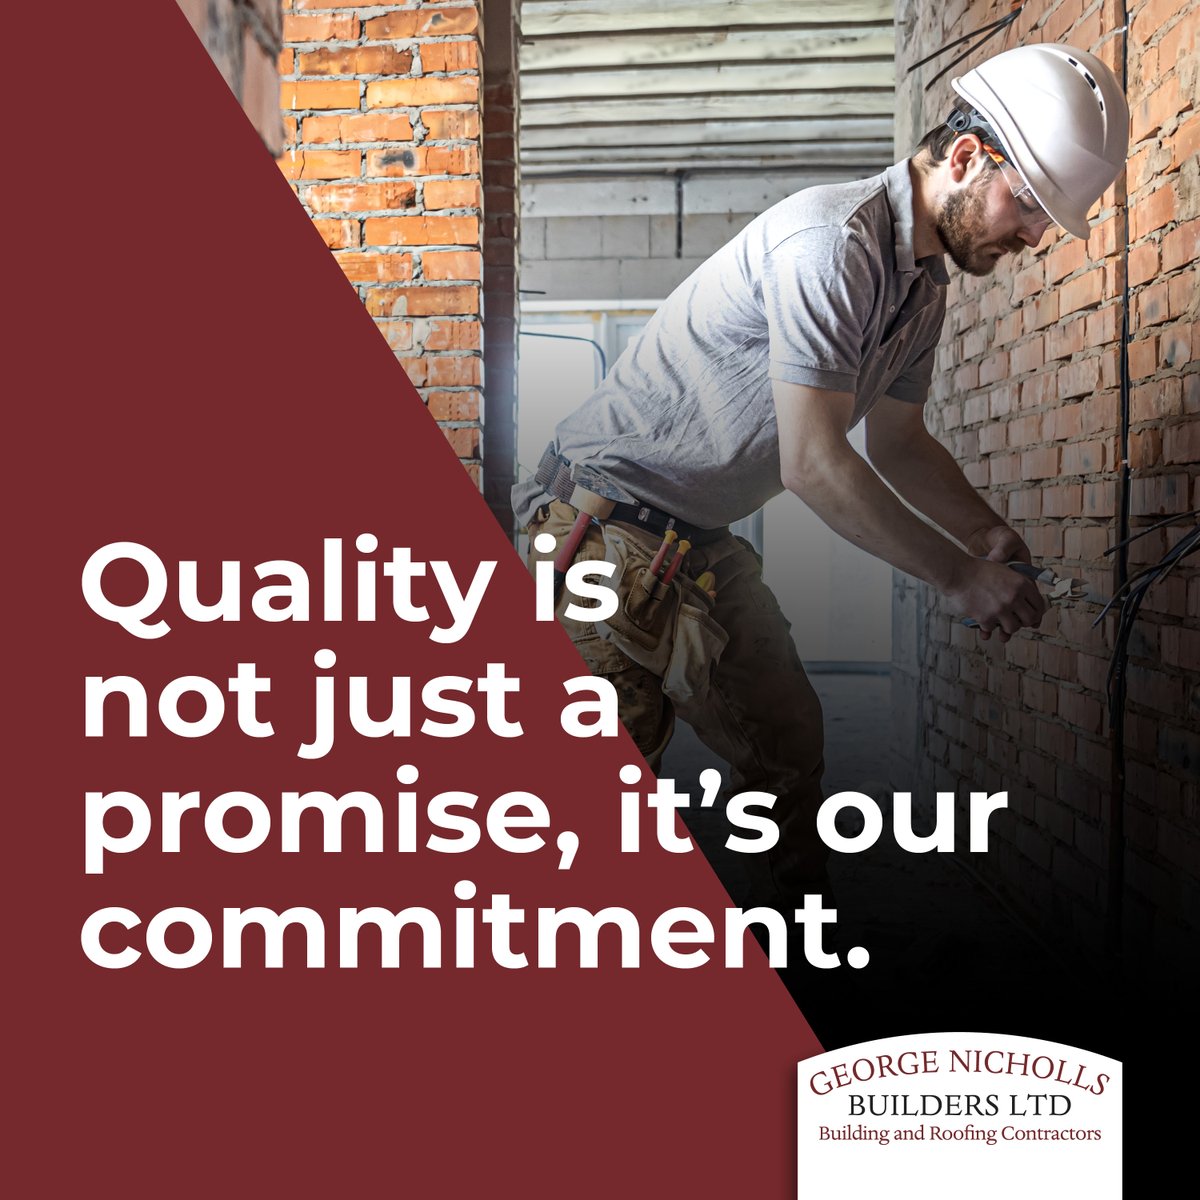 Quality is not just a promise, it's our commitment. Choose George Nicholls for your construction needs and experience superior workmanship every step of the way.
👷‍♂️

#Builders #Oxted #Surrey #Kent